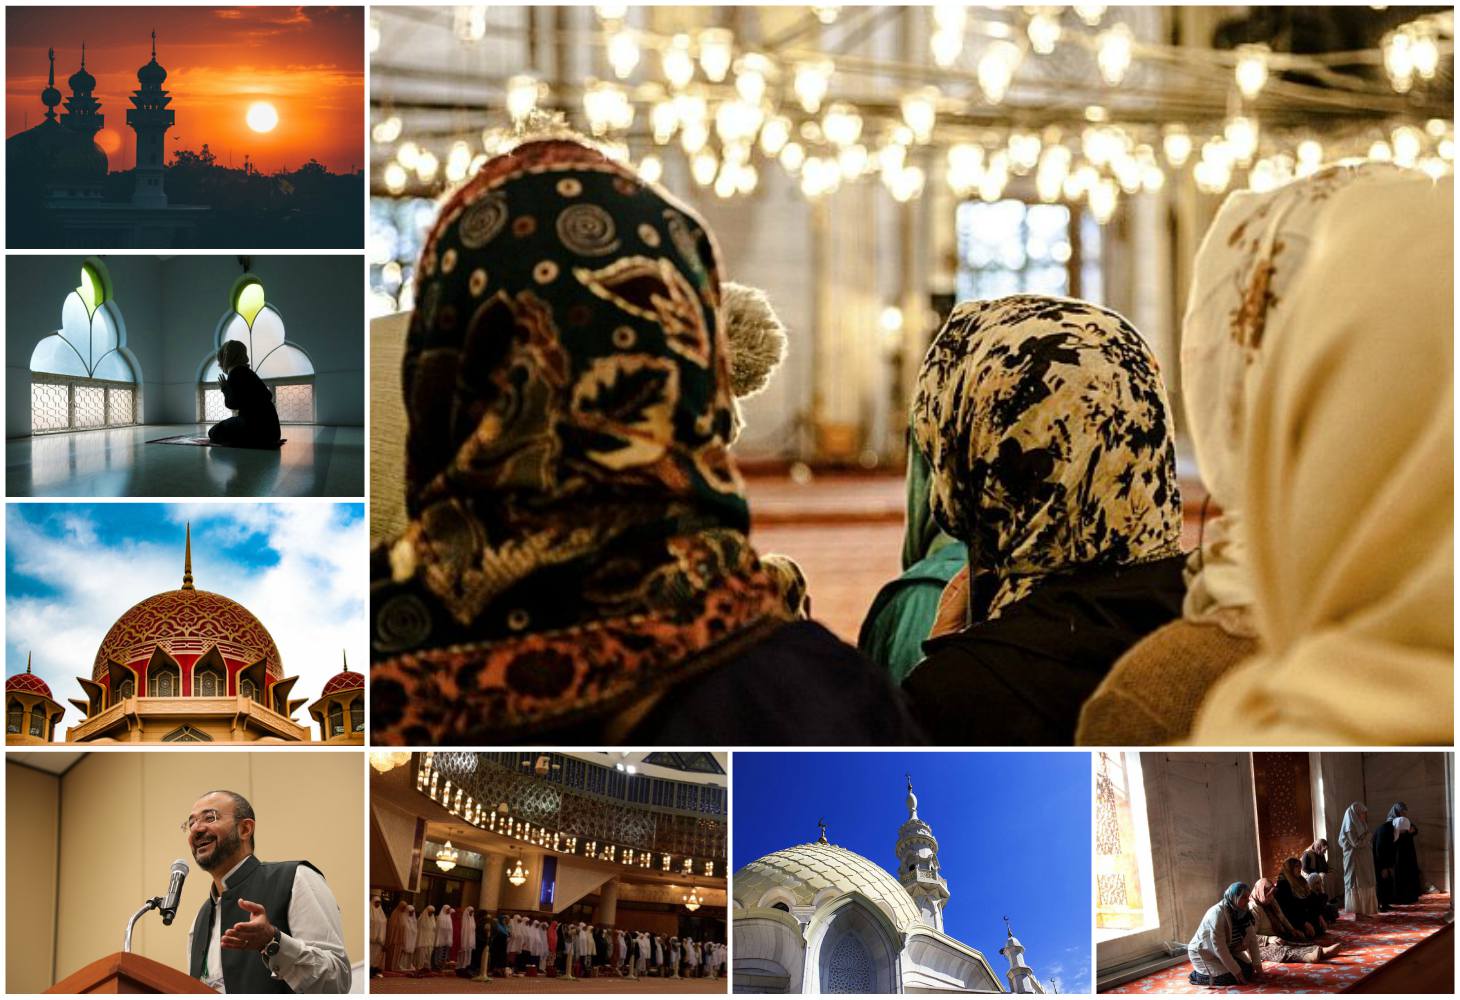 Revisiting Mosque's Role in the 21st Century - About Islam